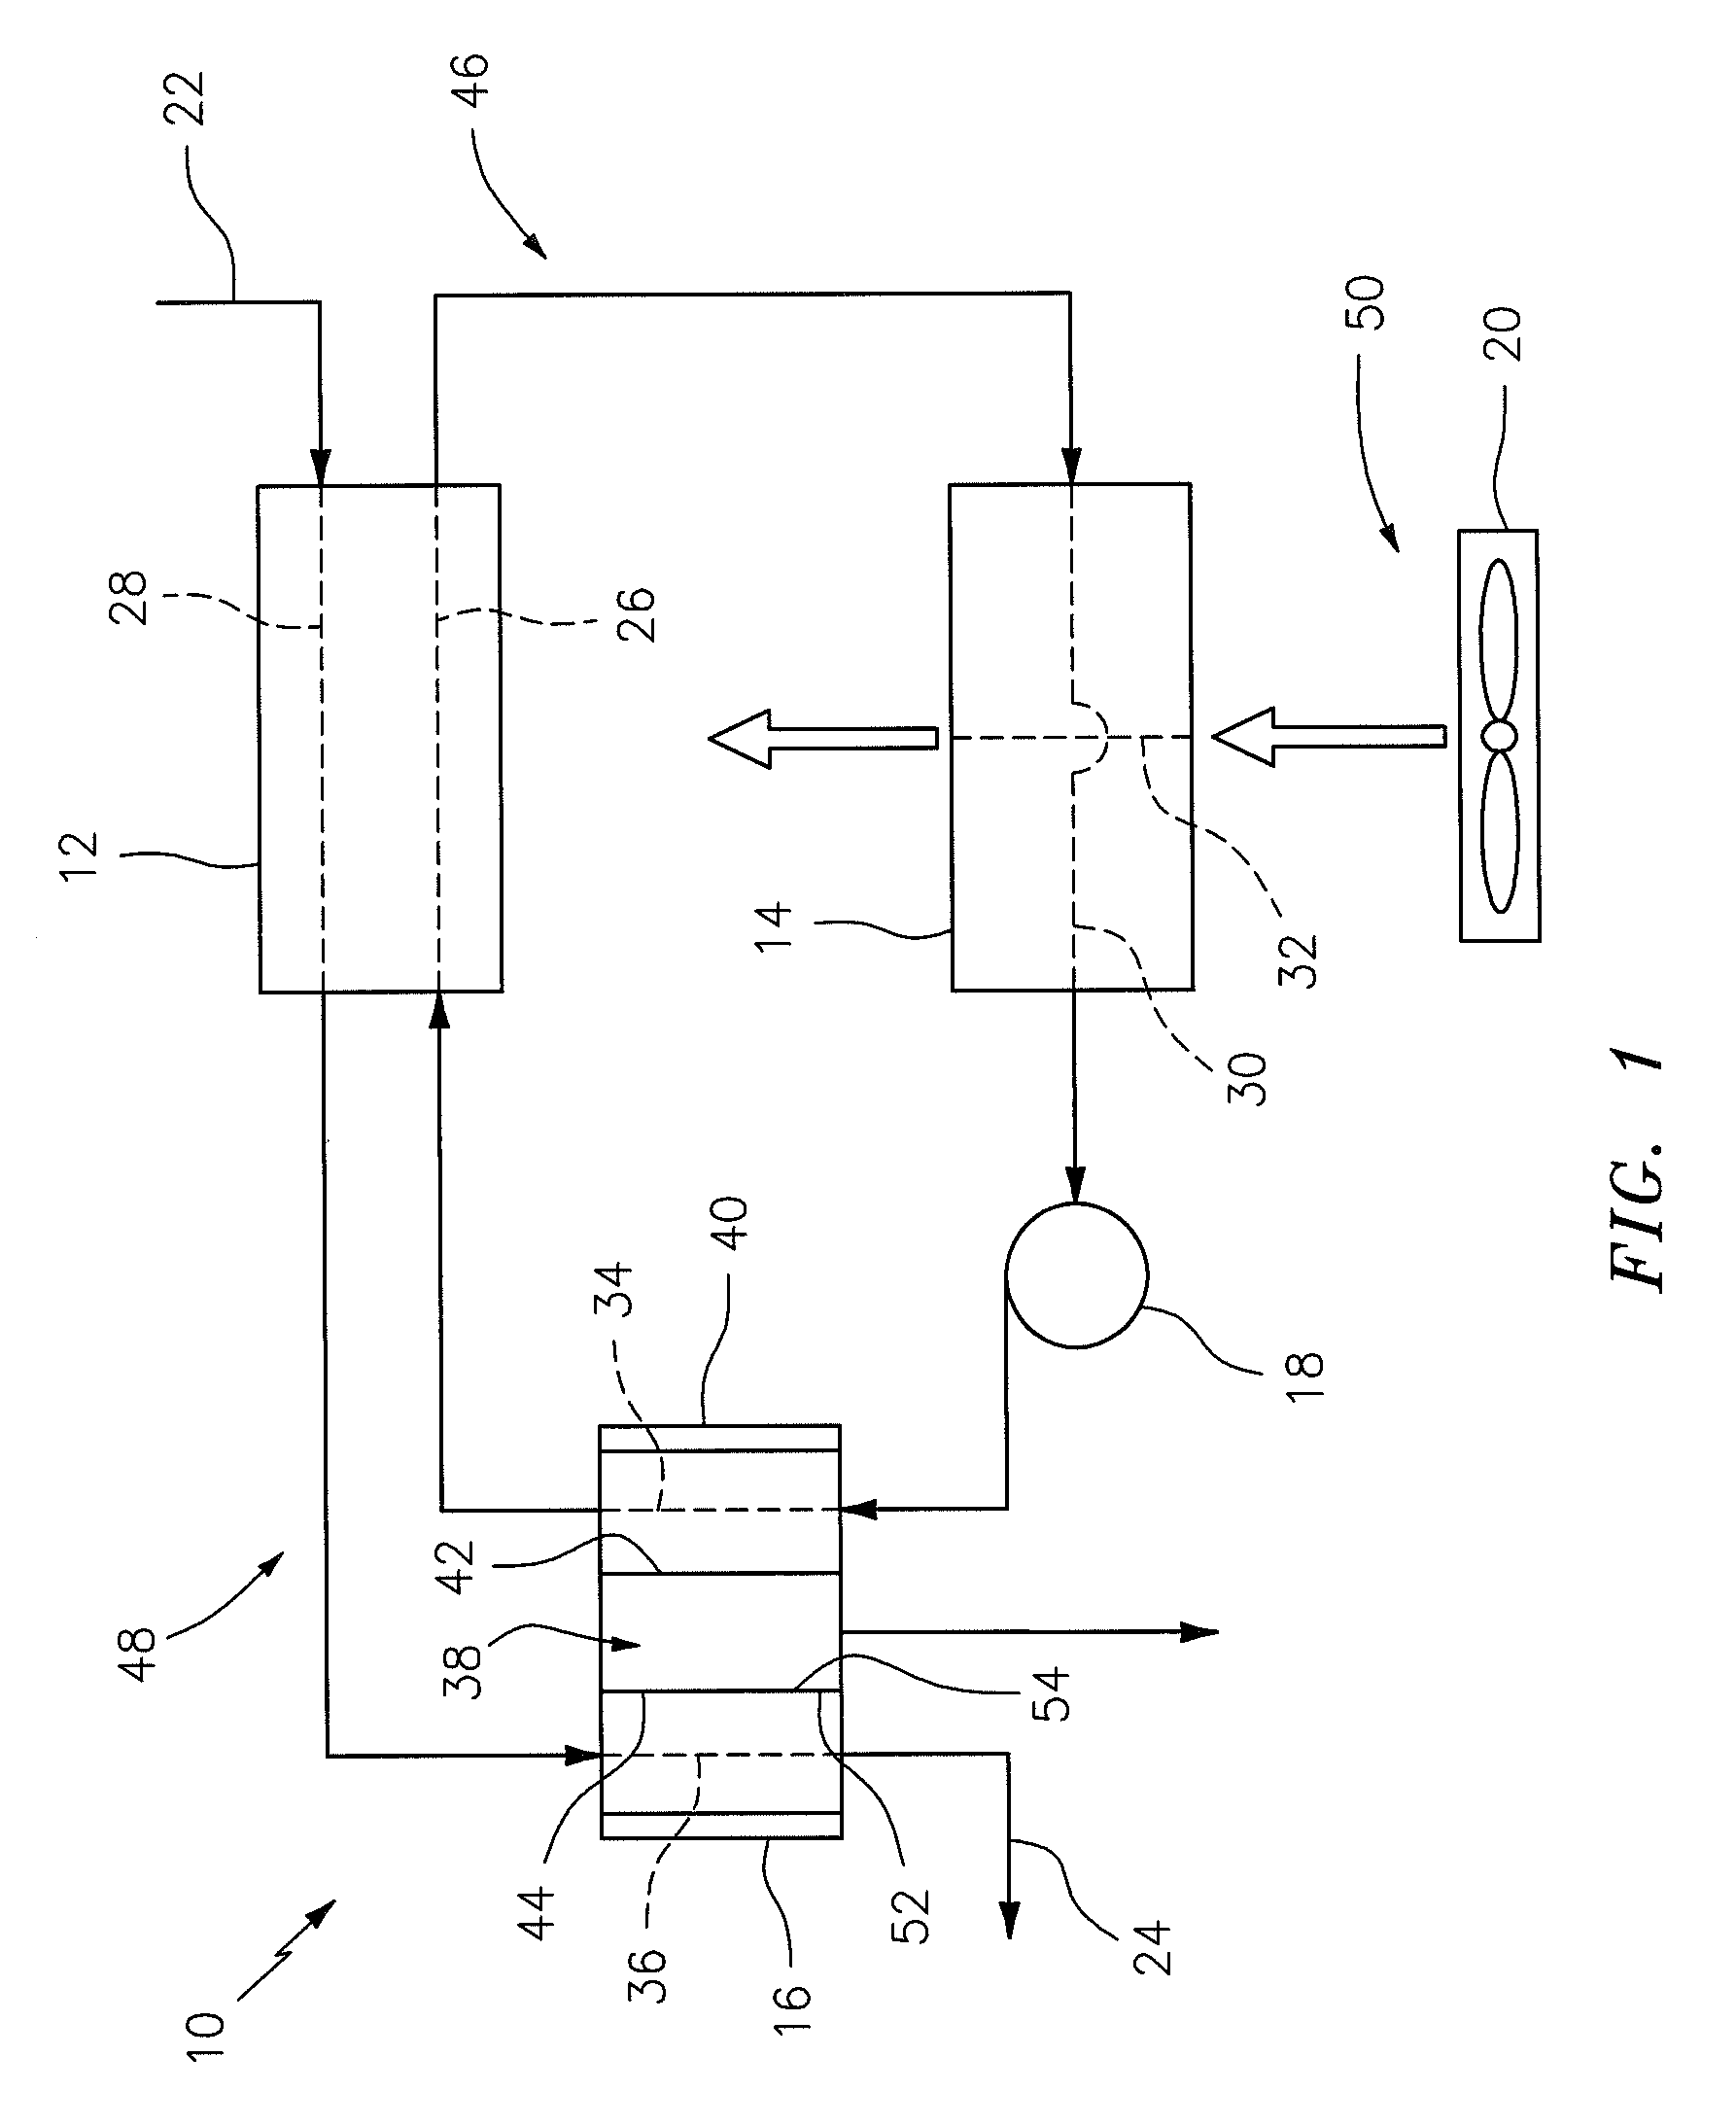 Heat exchange system configured with a membrane contactor